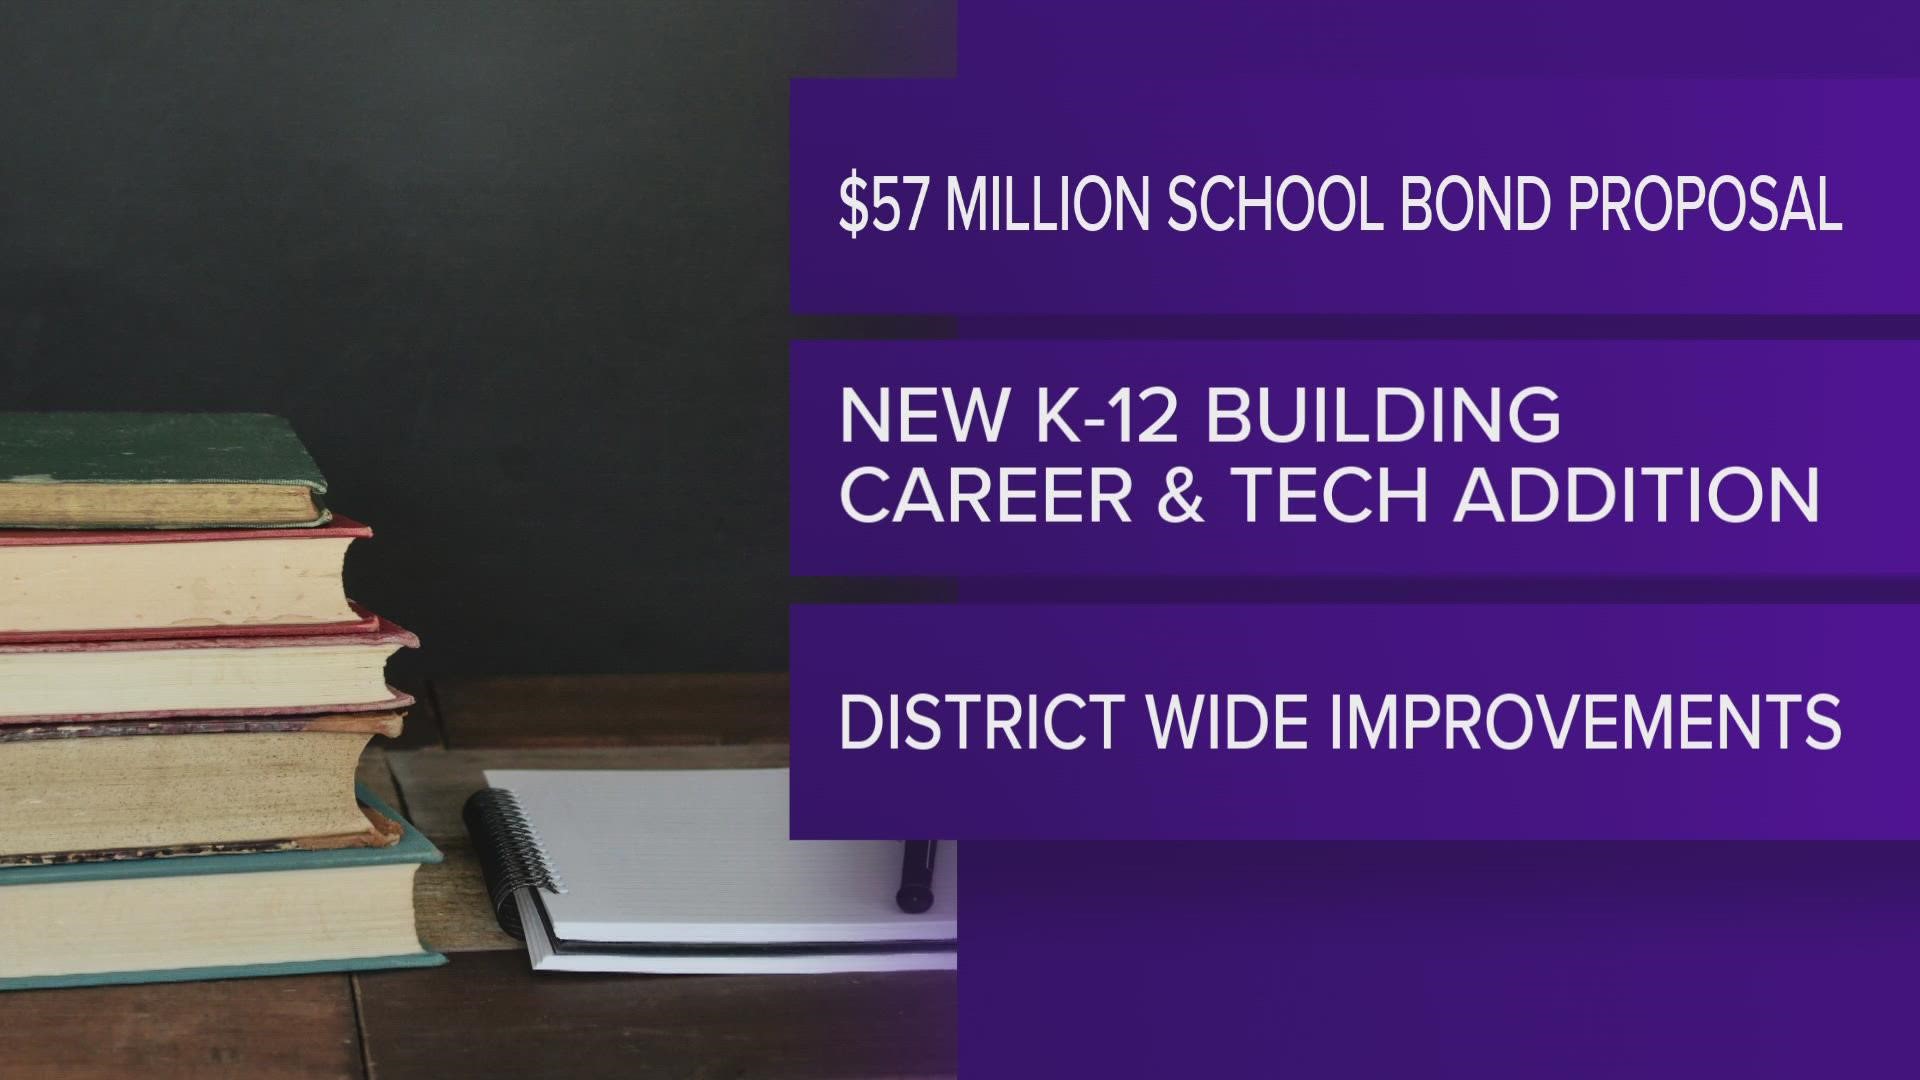 Some of the new proposed projects in the bond include a new K-12 campus, and Career and Technical Education addition to the high school